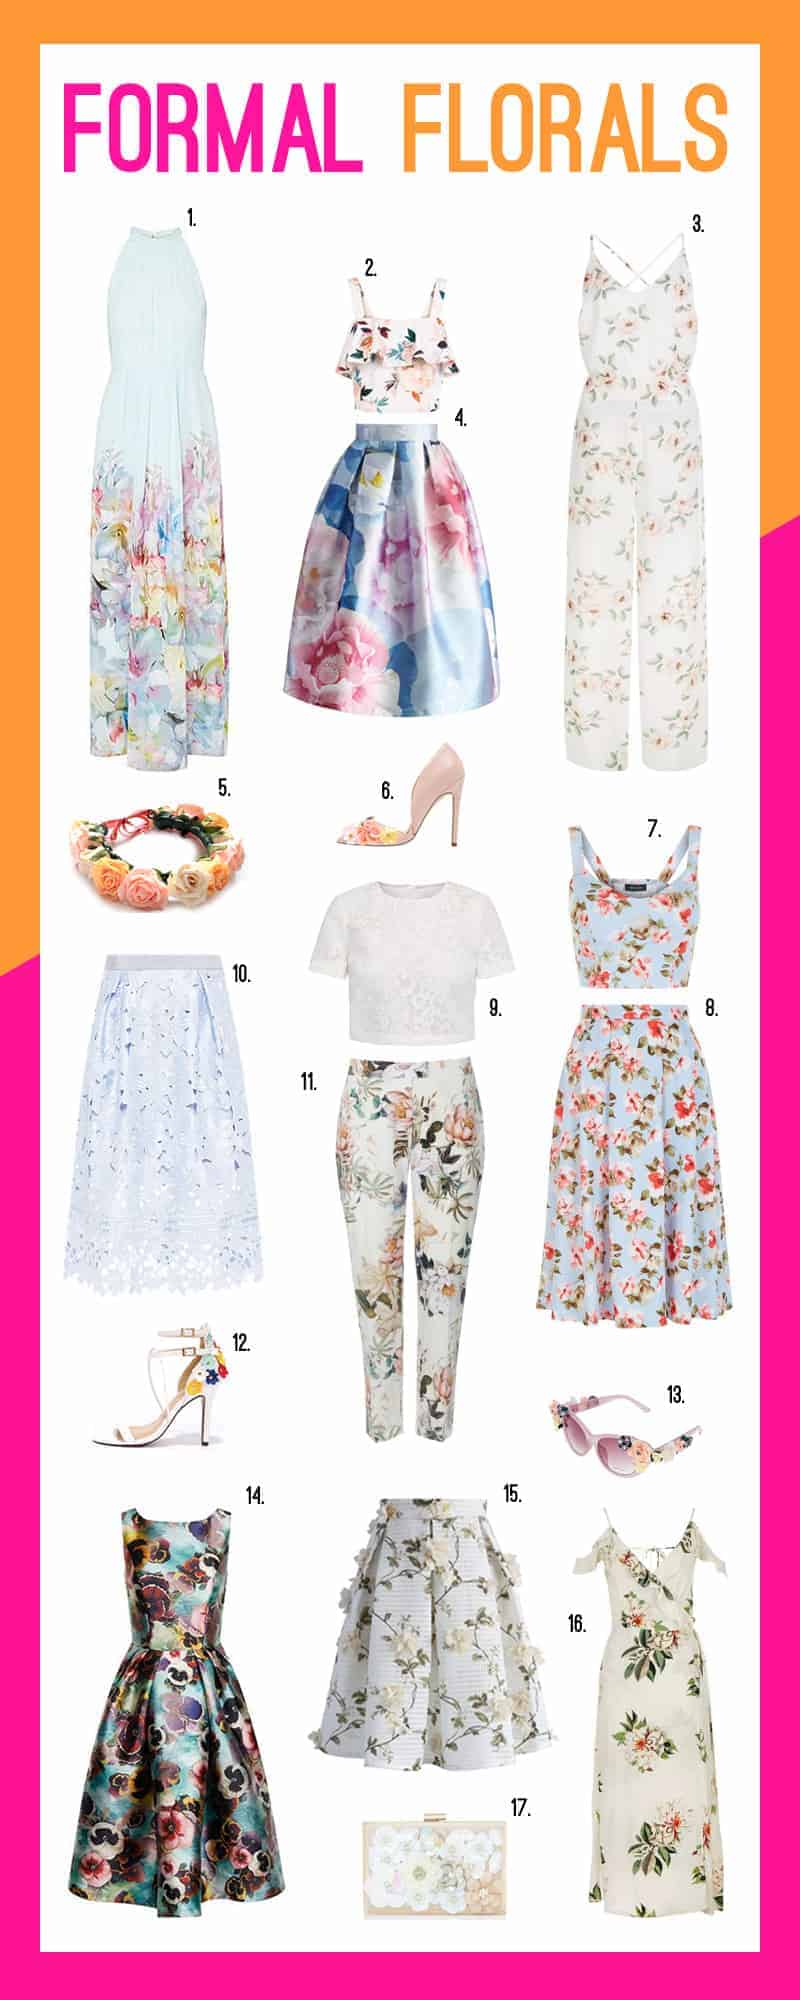 formal florals: 17 floral outfit ideas for a summer wedding